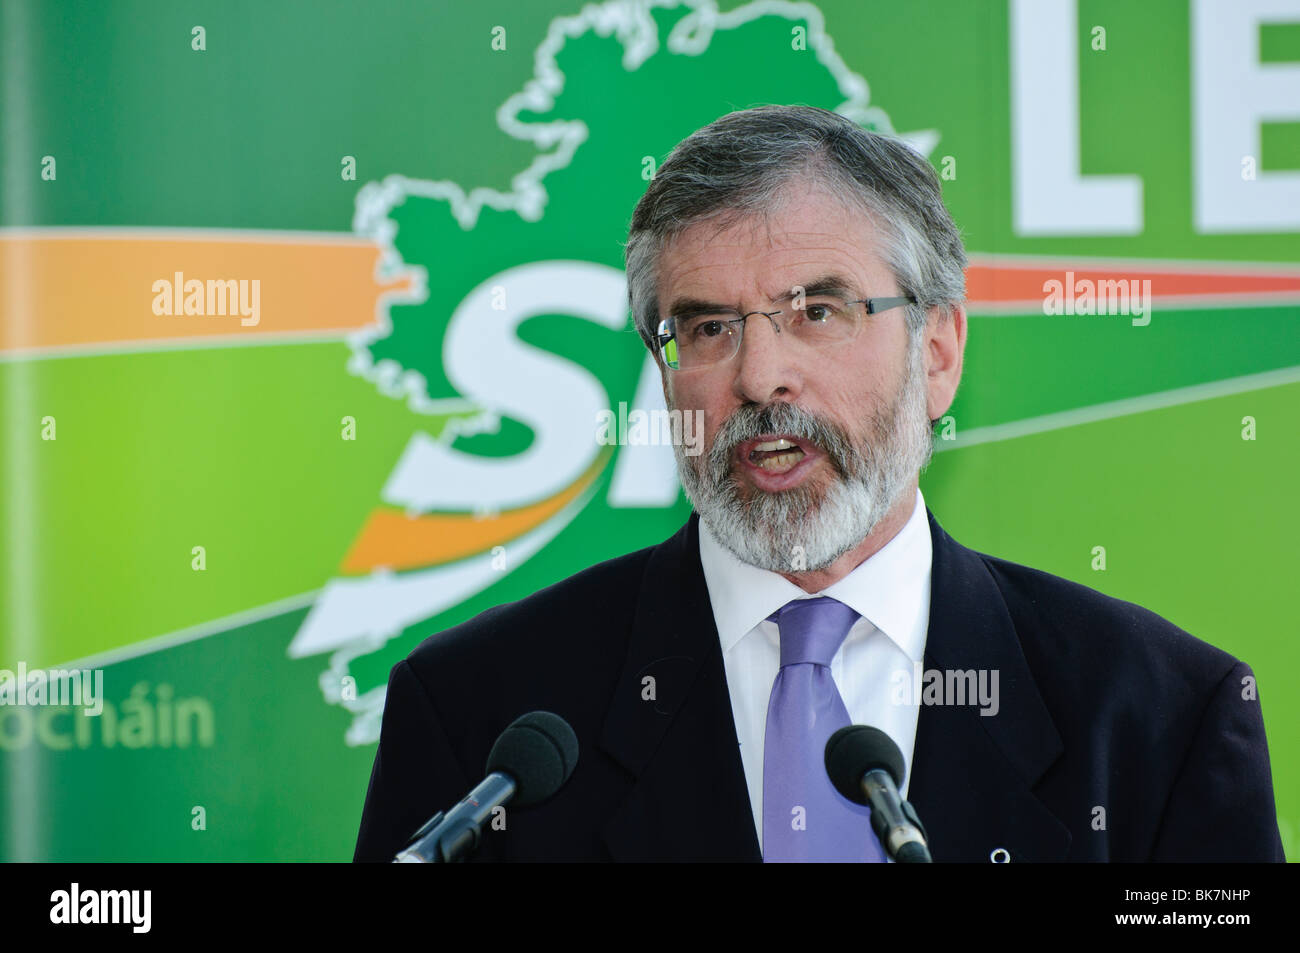 Gerry Adams, President of Sinn Fein, at the launch of the 2010 General Election manifesto Stock Photo